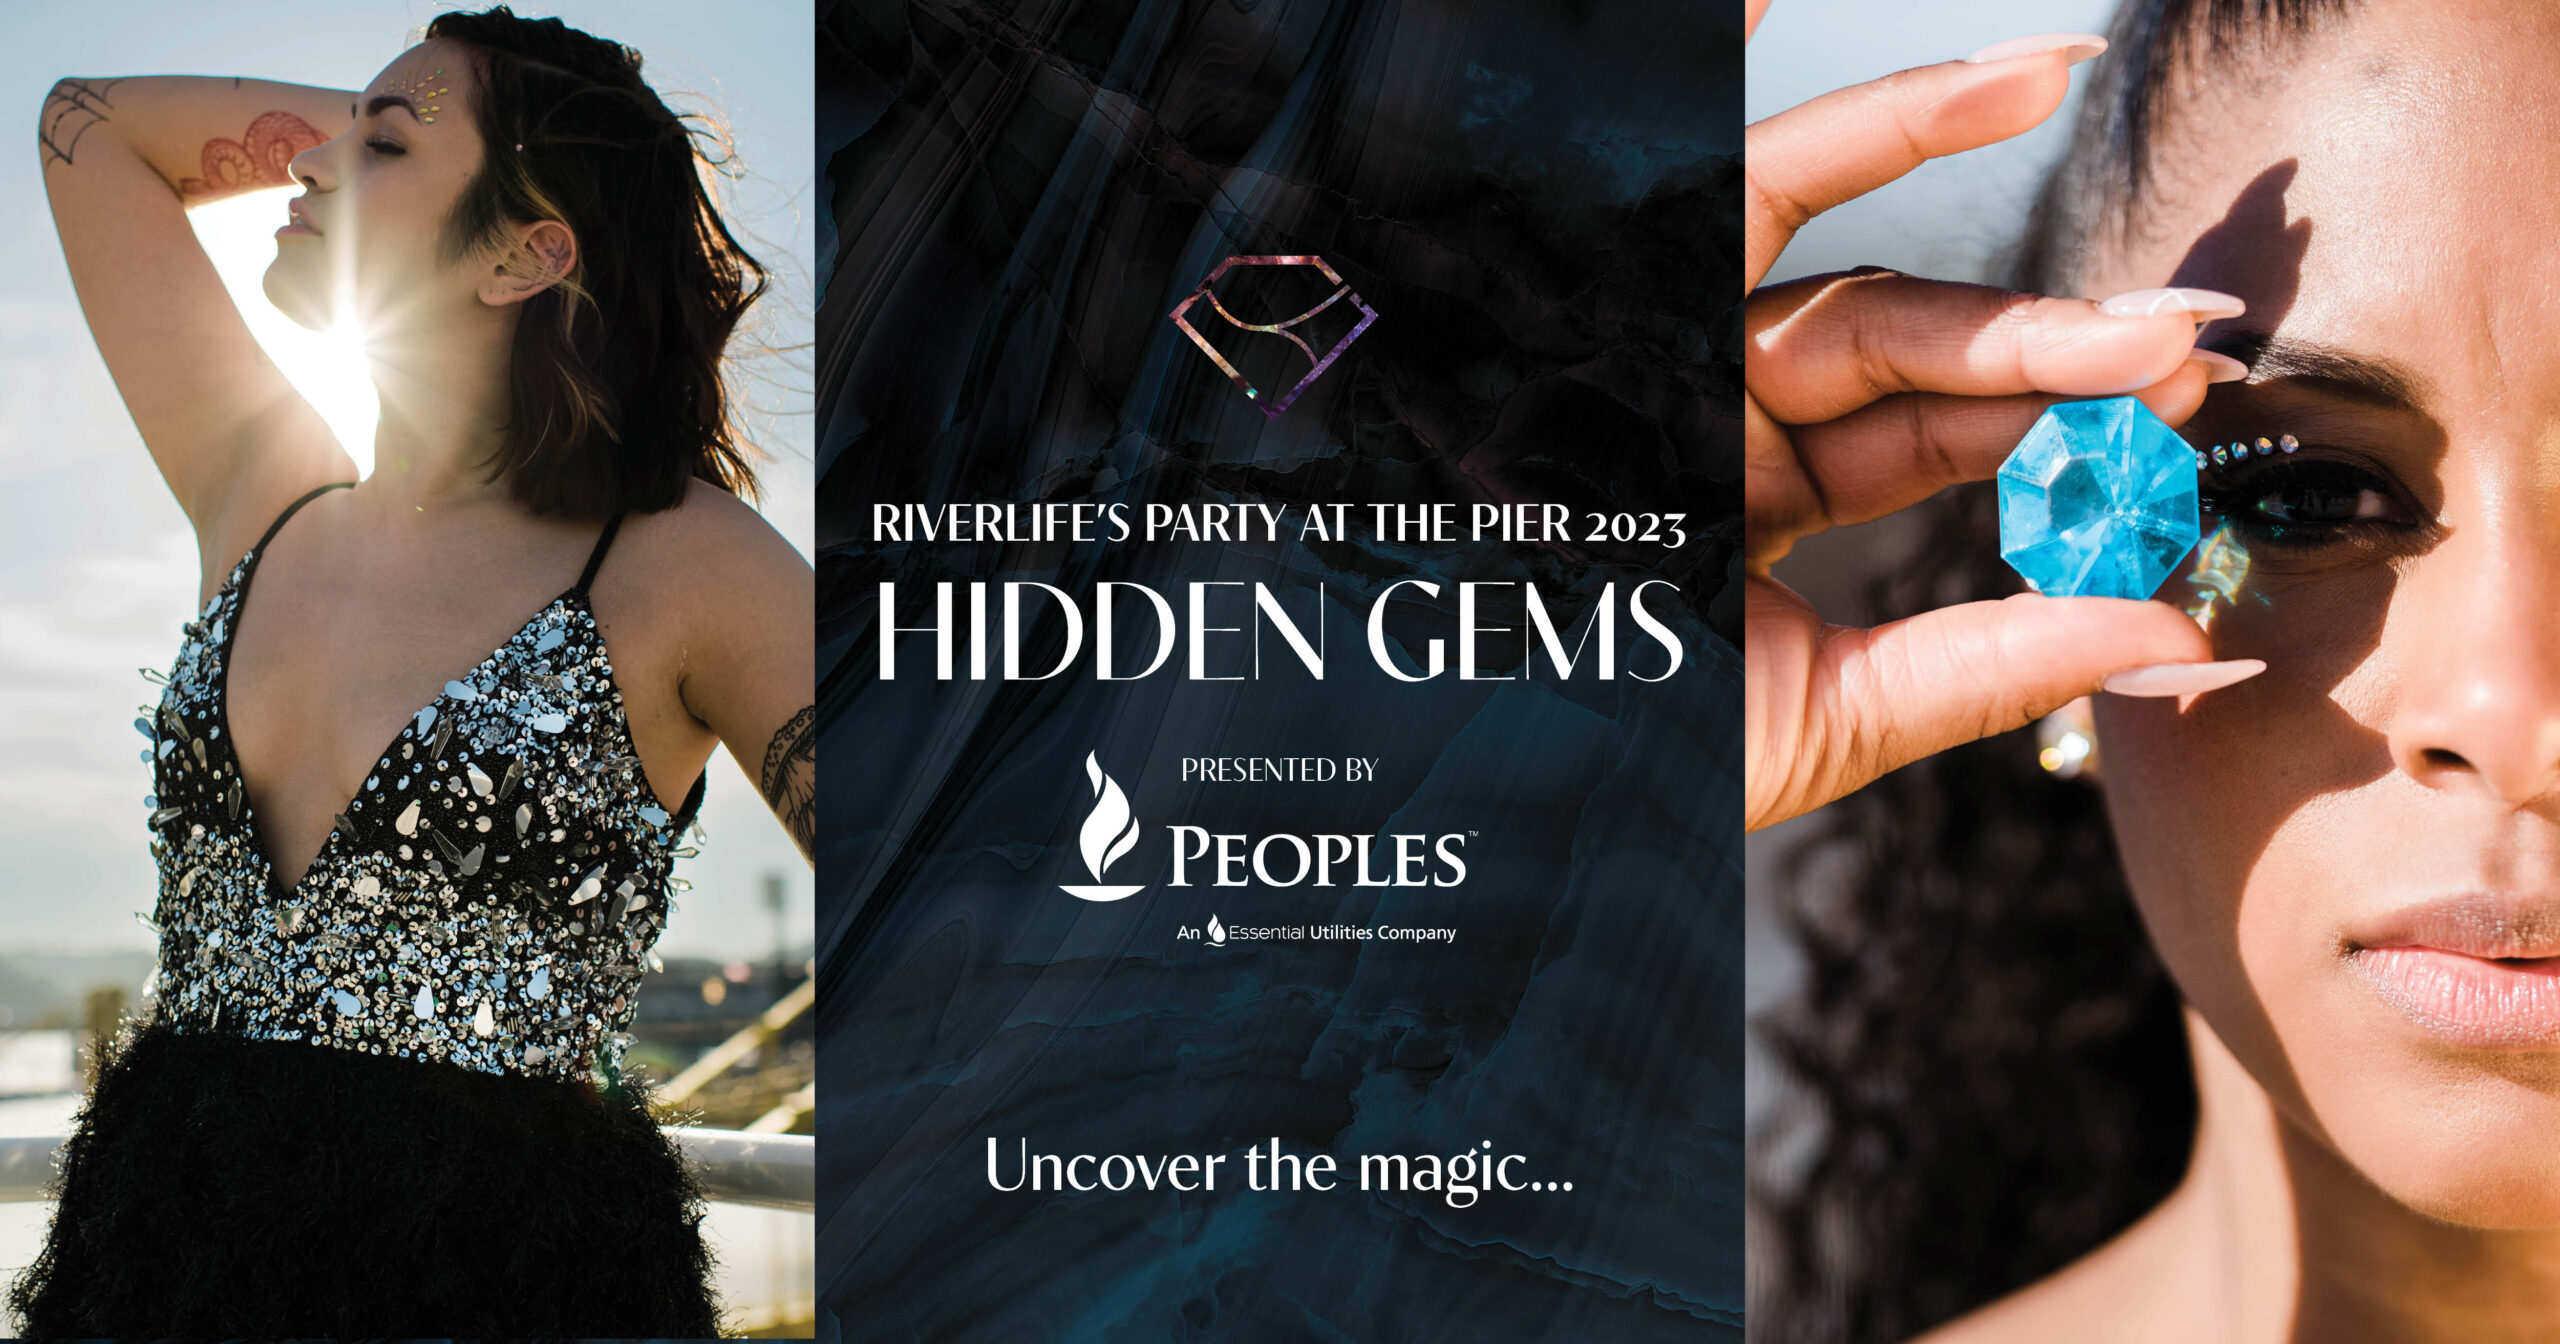 Riverlife’s Party at the Pier Announces a Sparkling “Hidden Gems” Theme